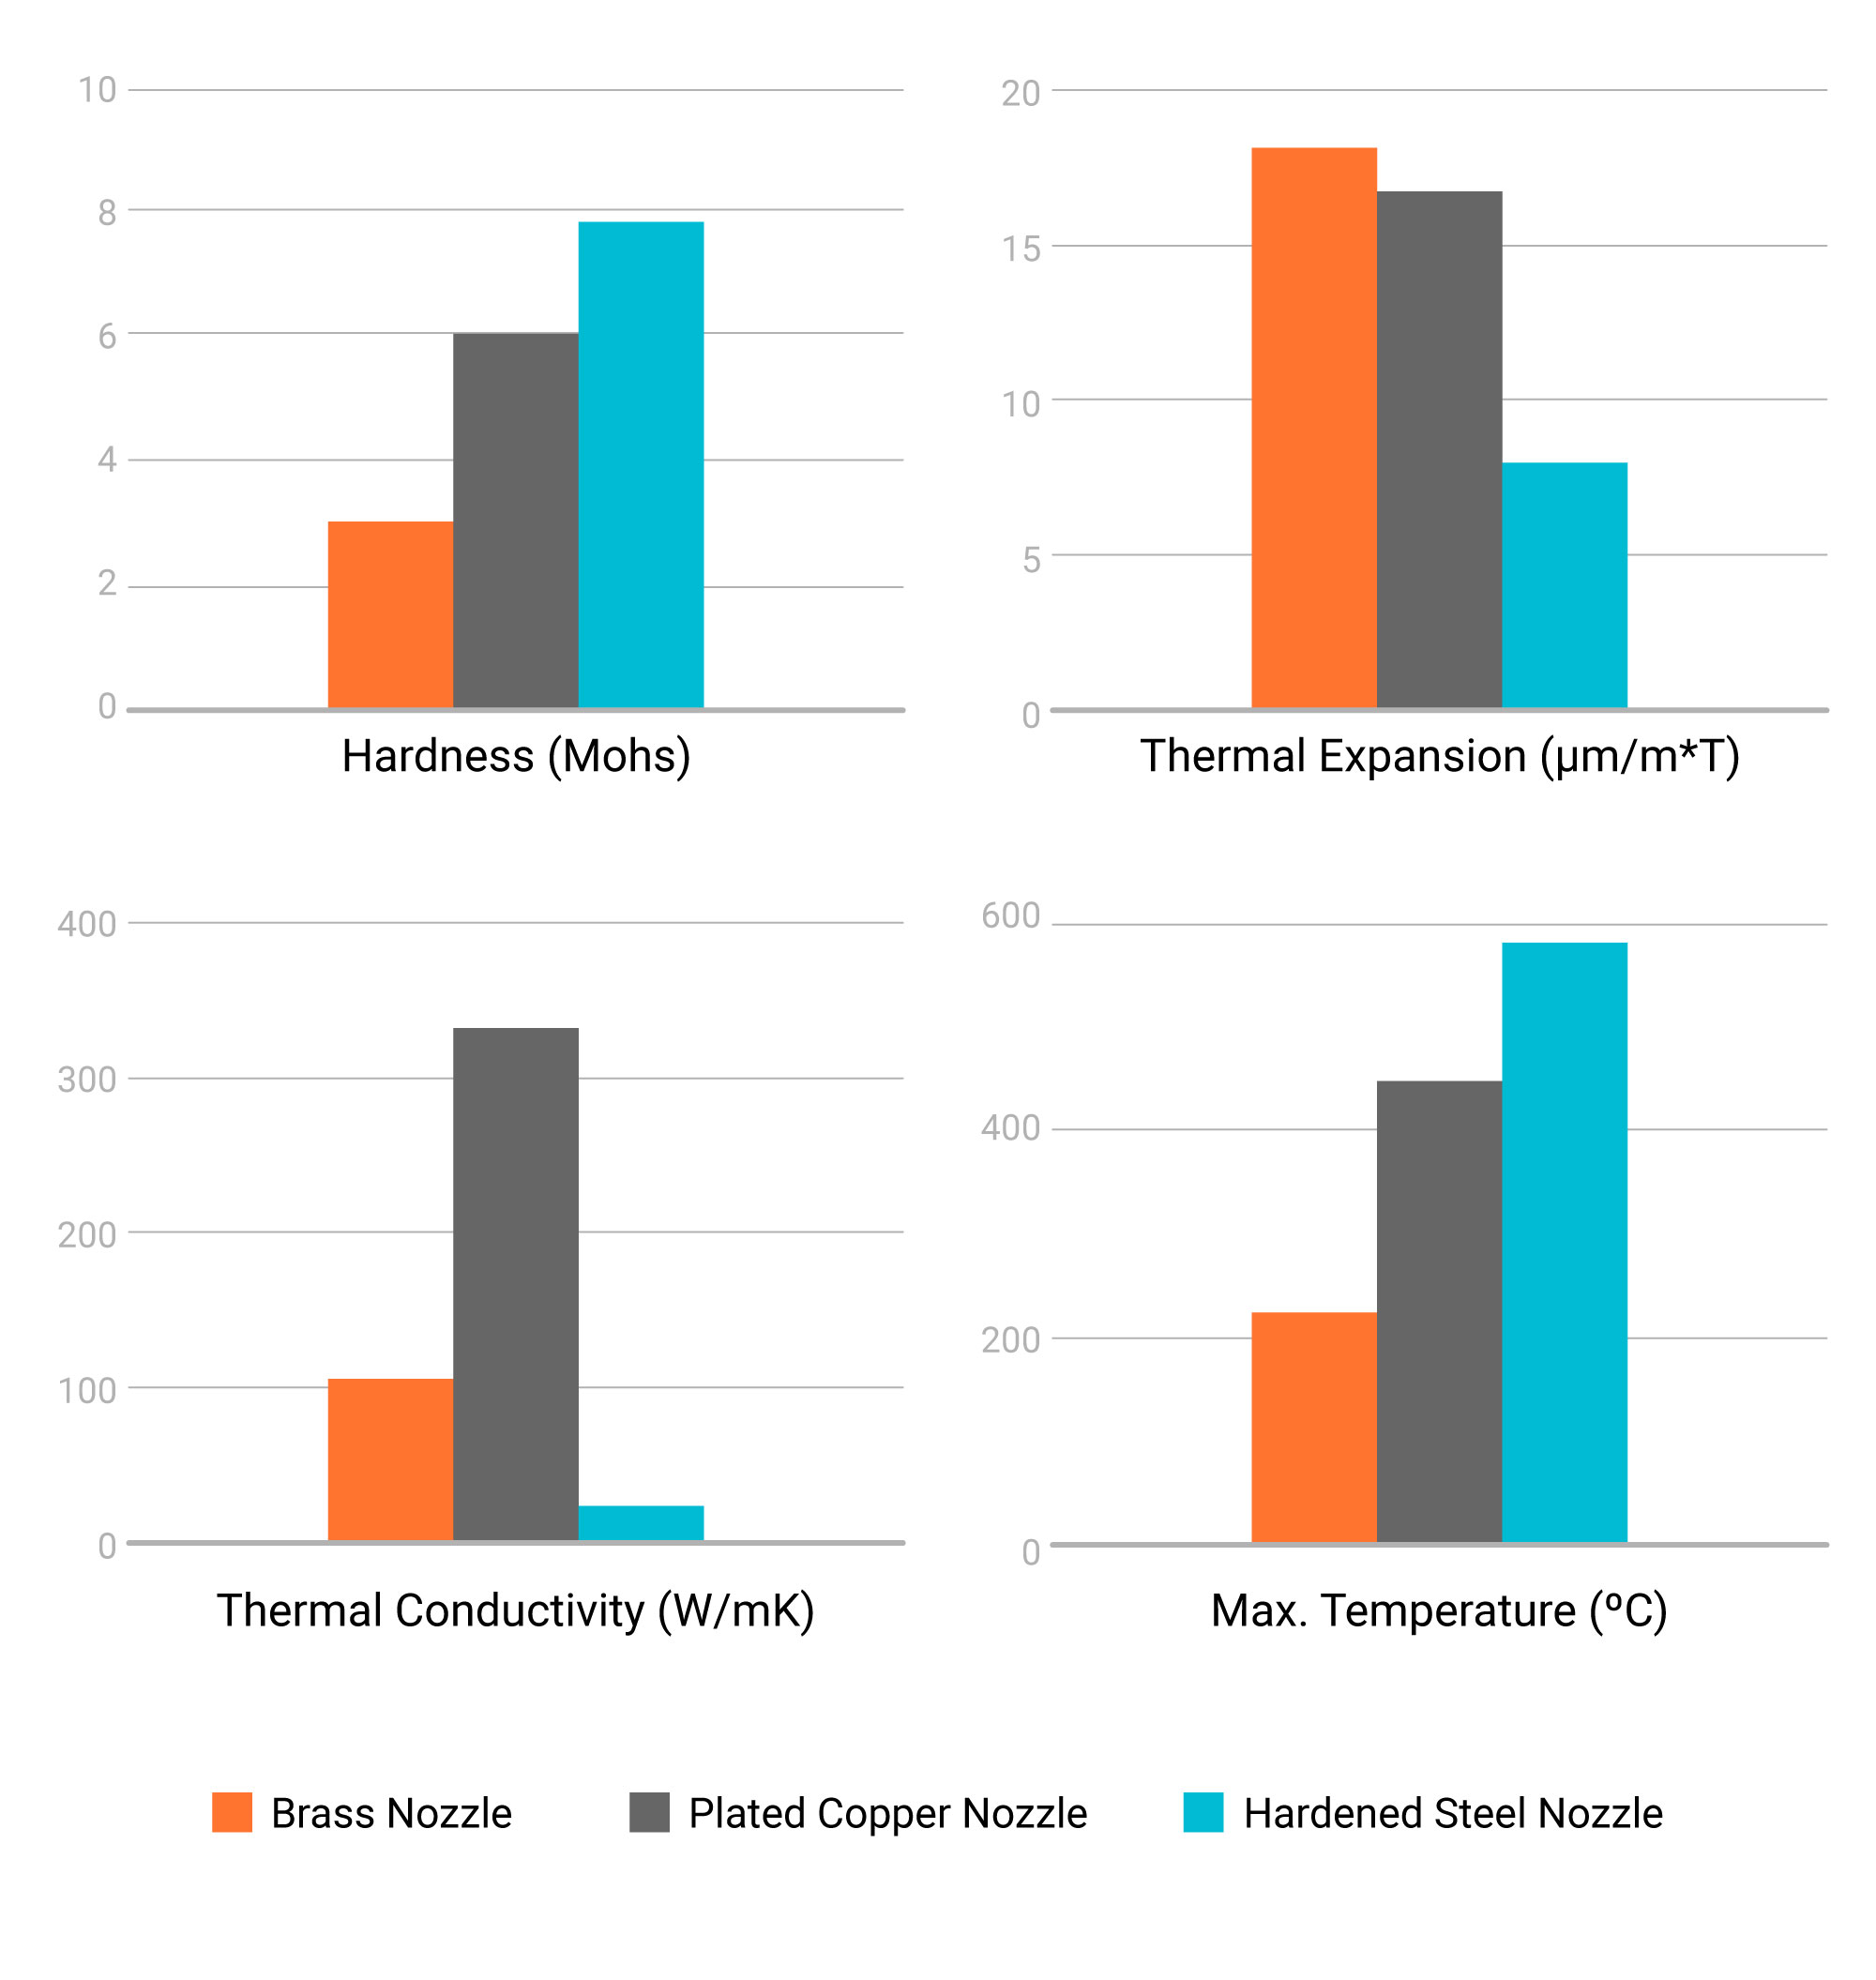 Comparison of brass, nickel-plated copper and hardened steel nozzles